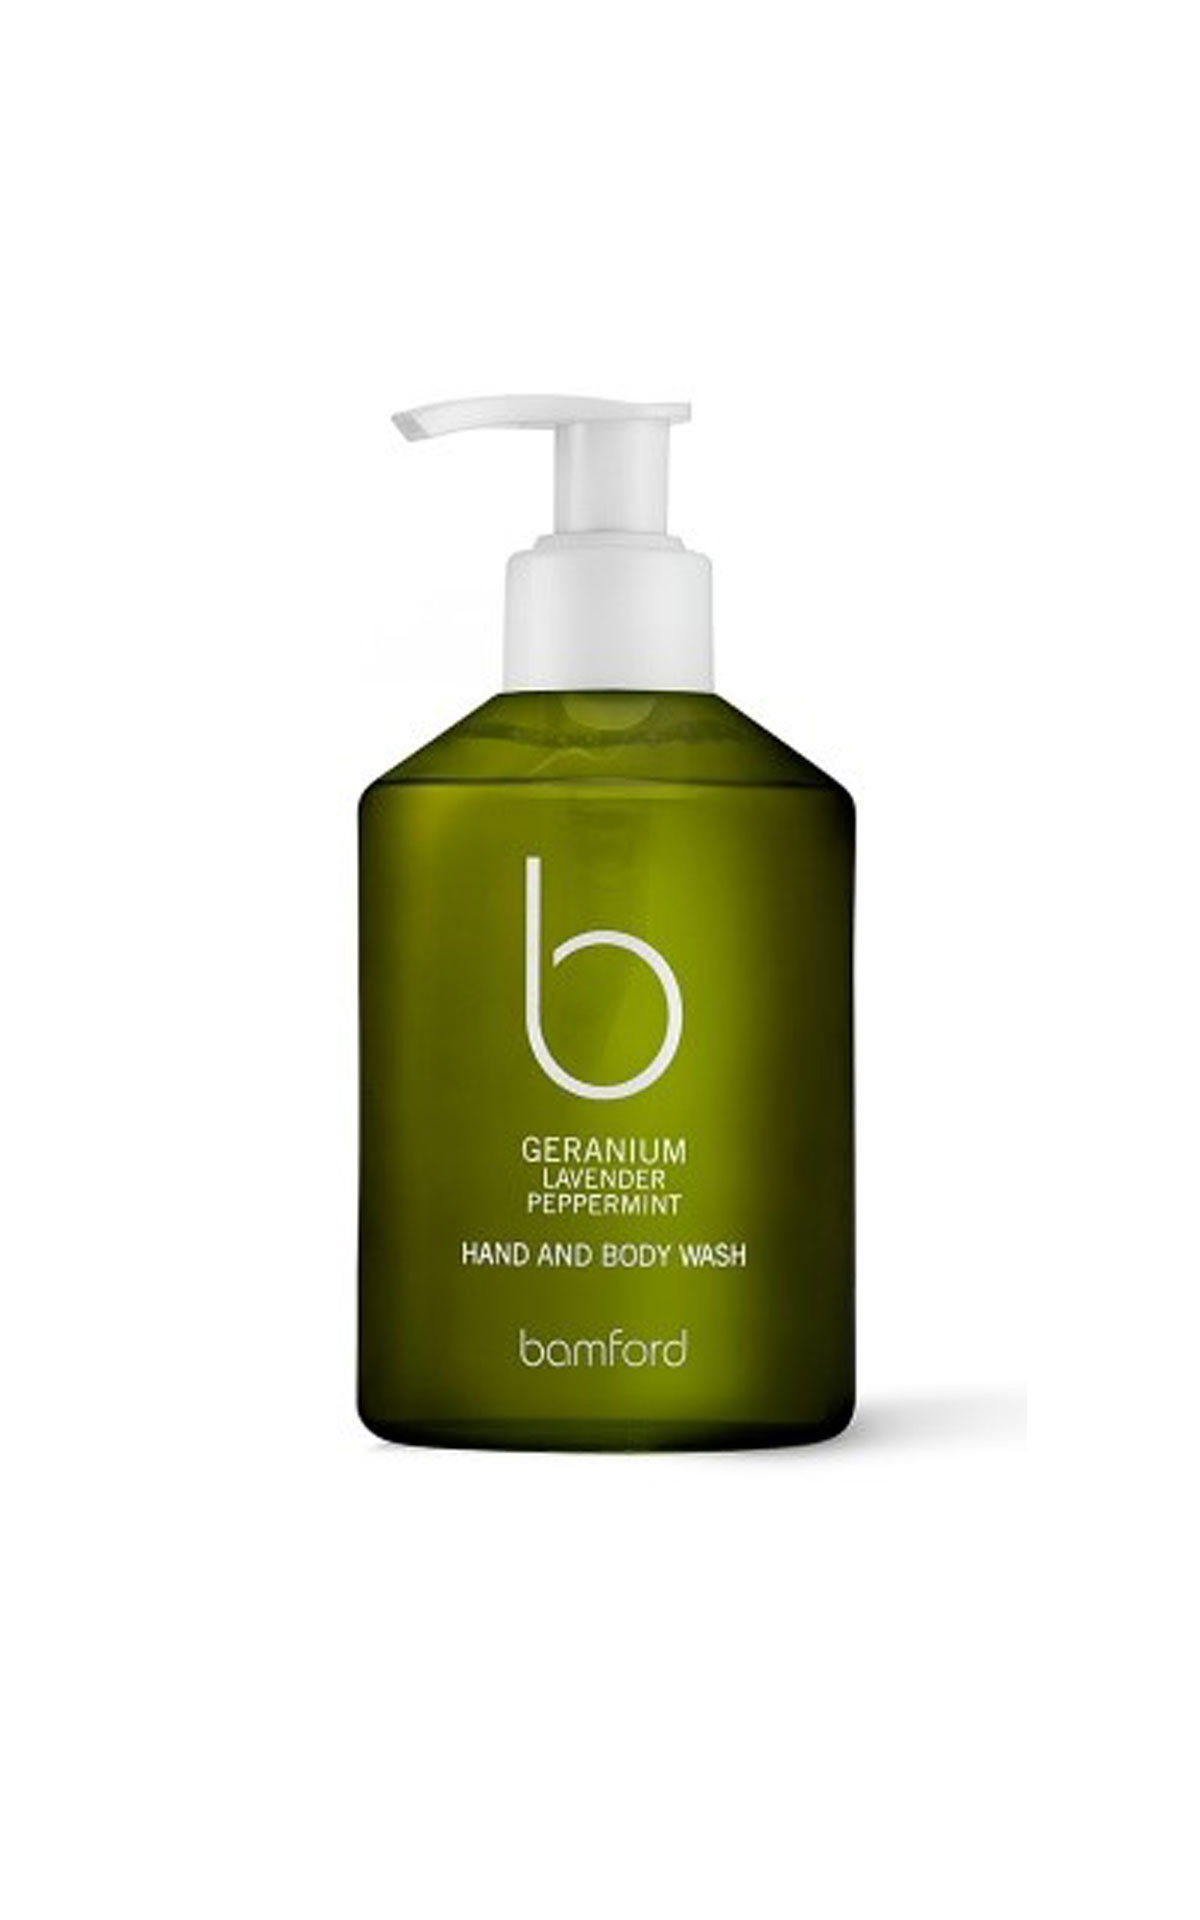 Bamford Geranium hand and body wash from Bicester Village